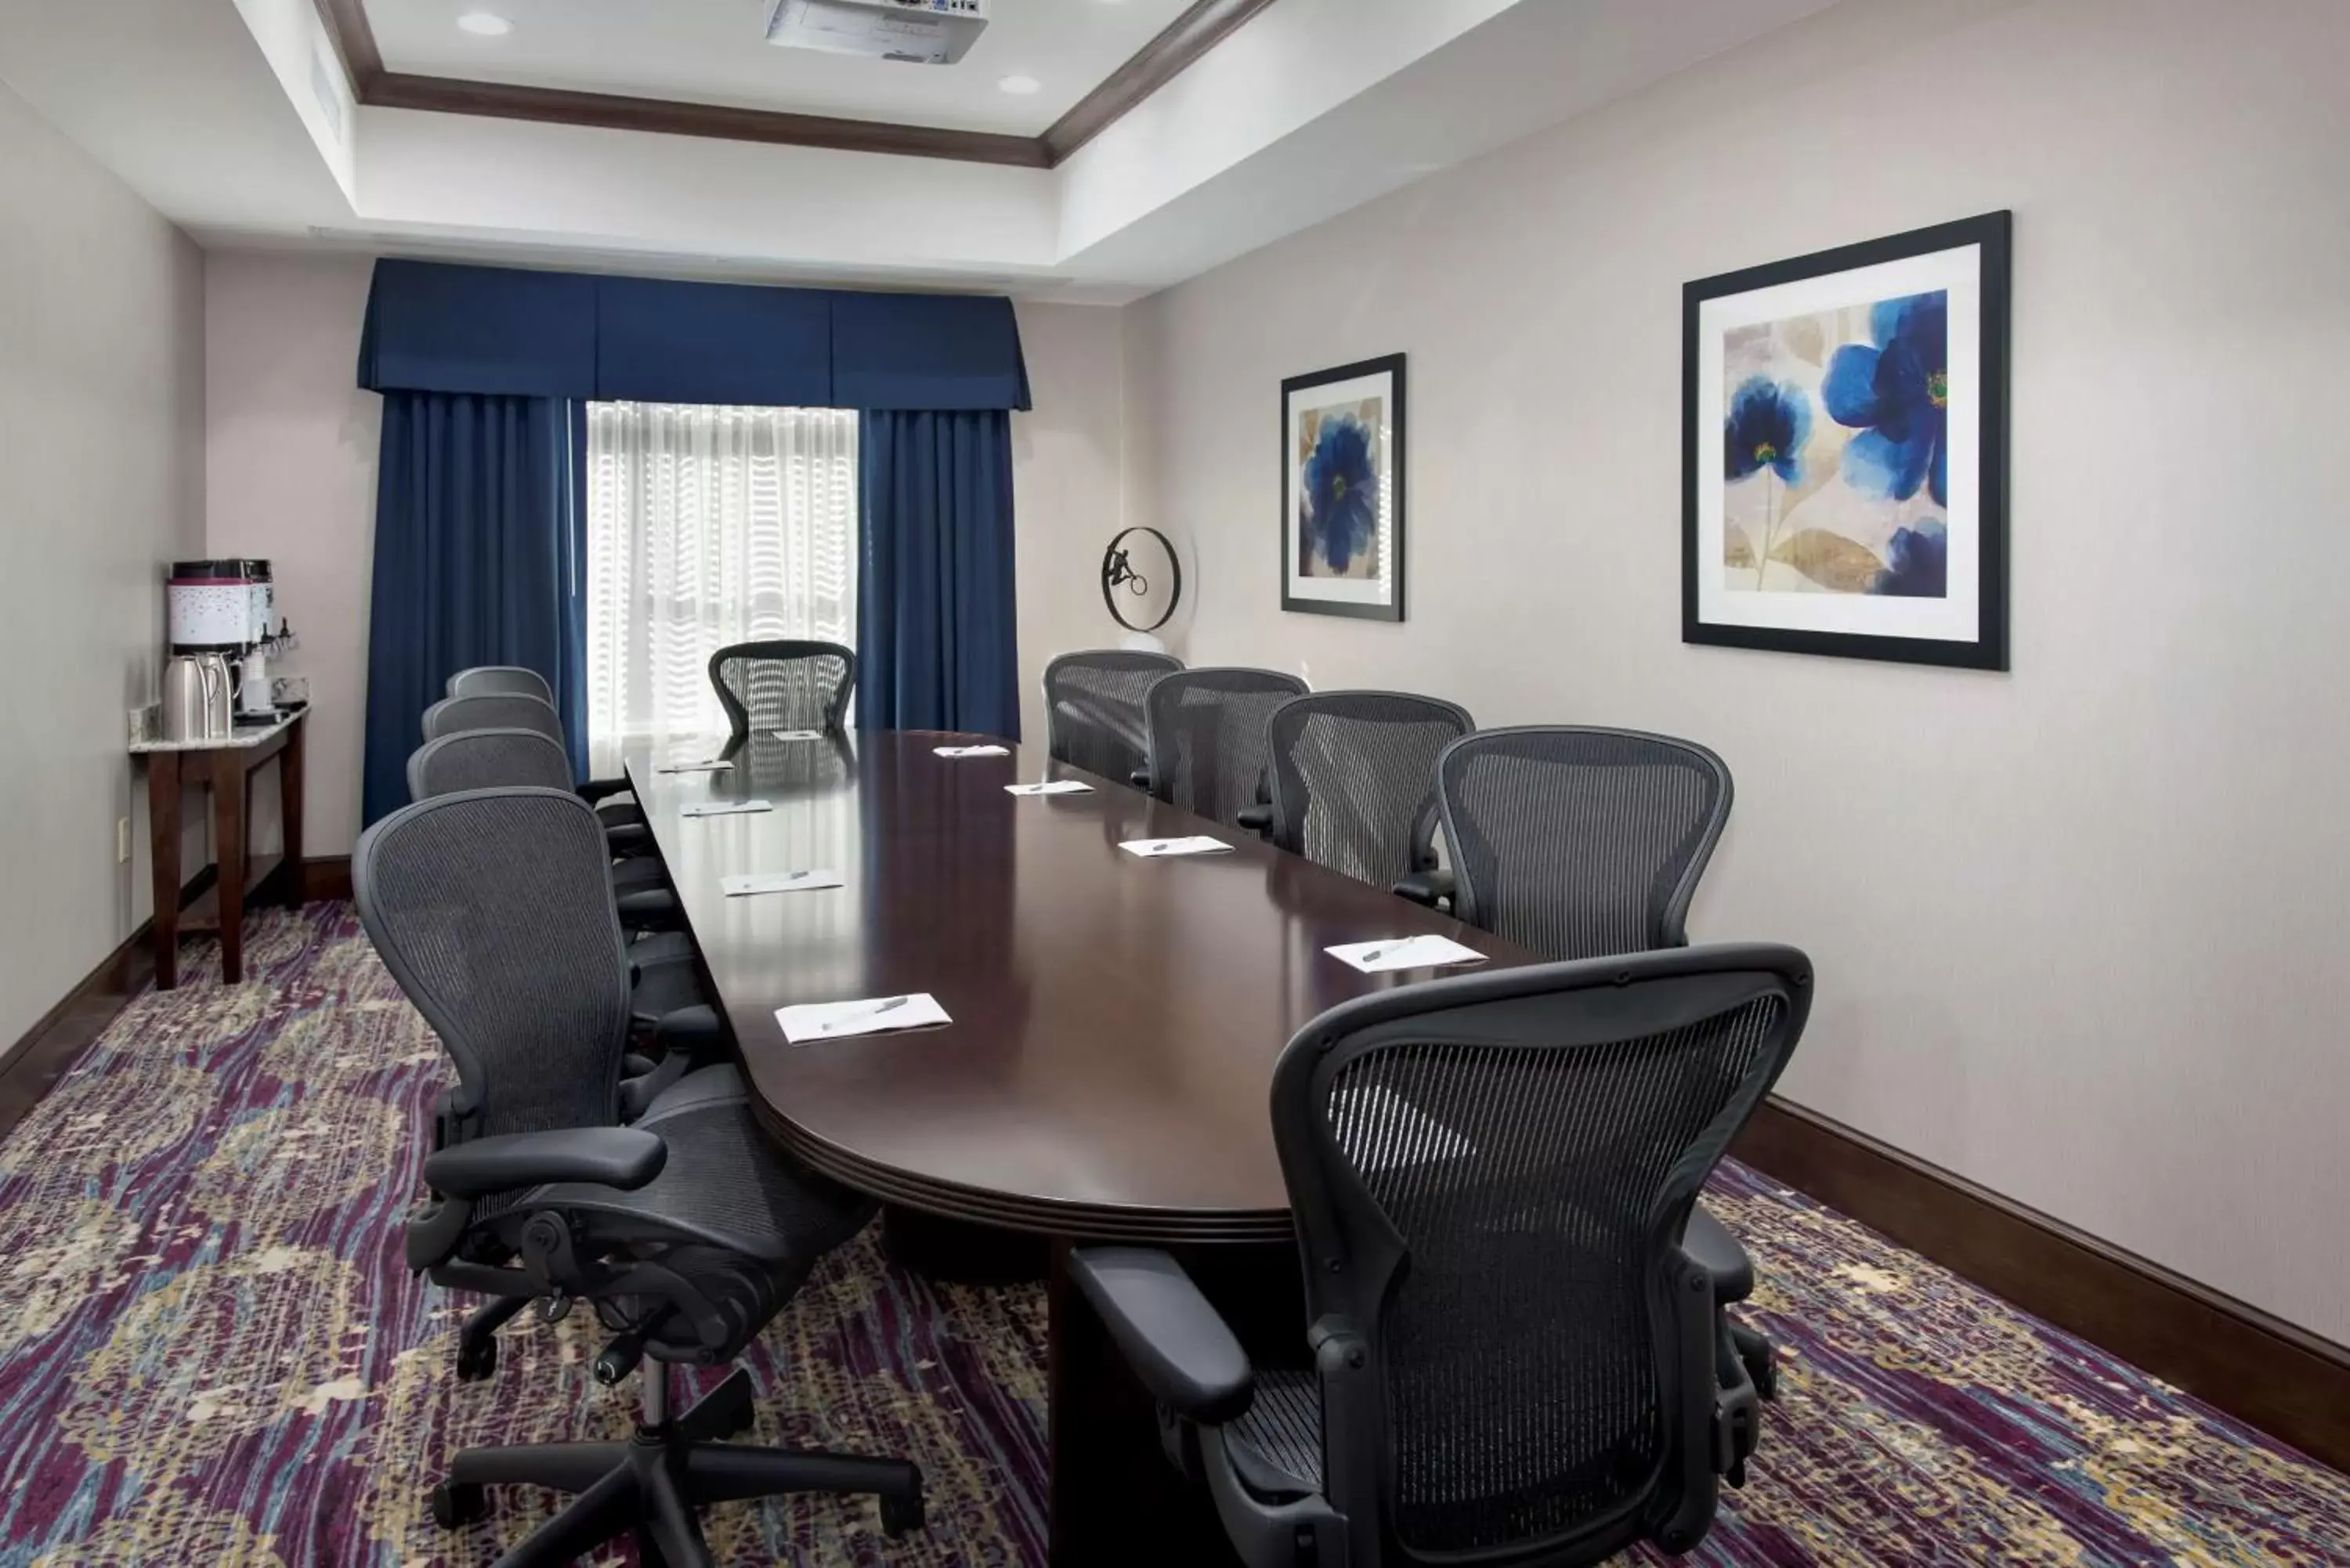 Meeting/conference room in Hampton Inn by Hilton New Paltz, NY